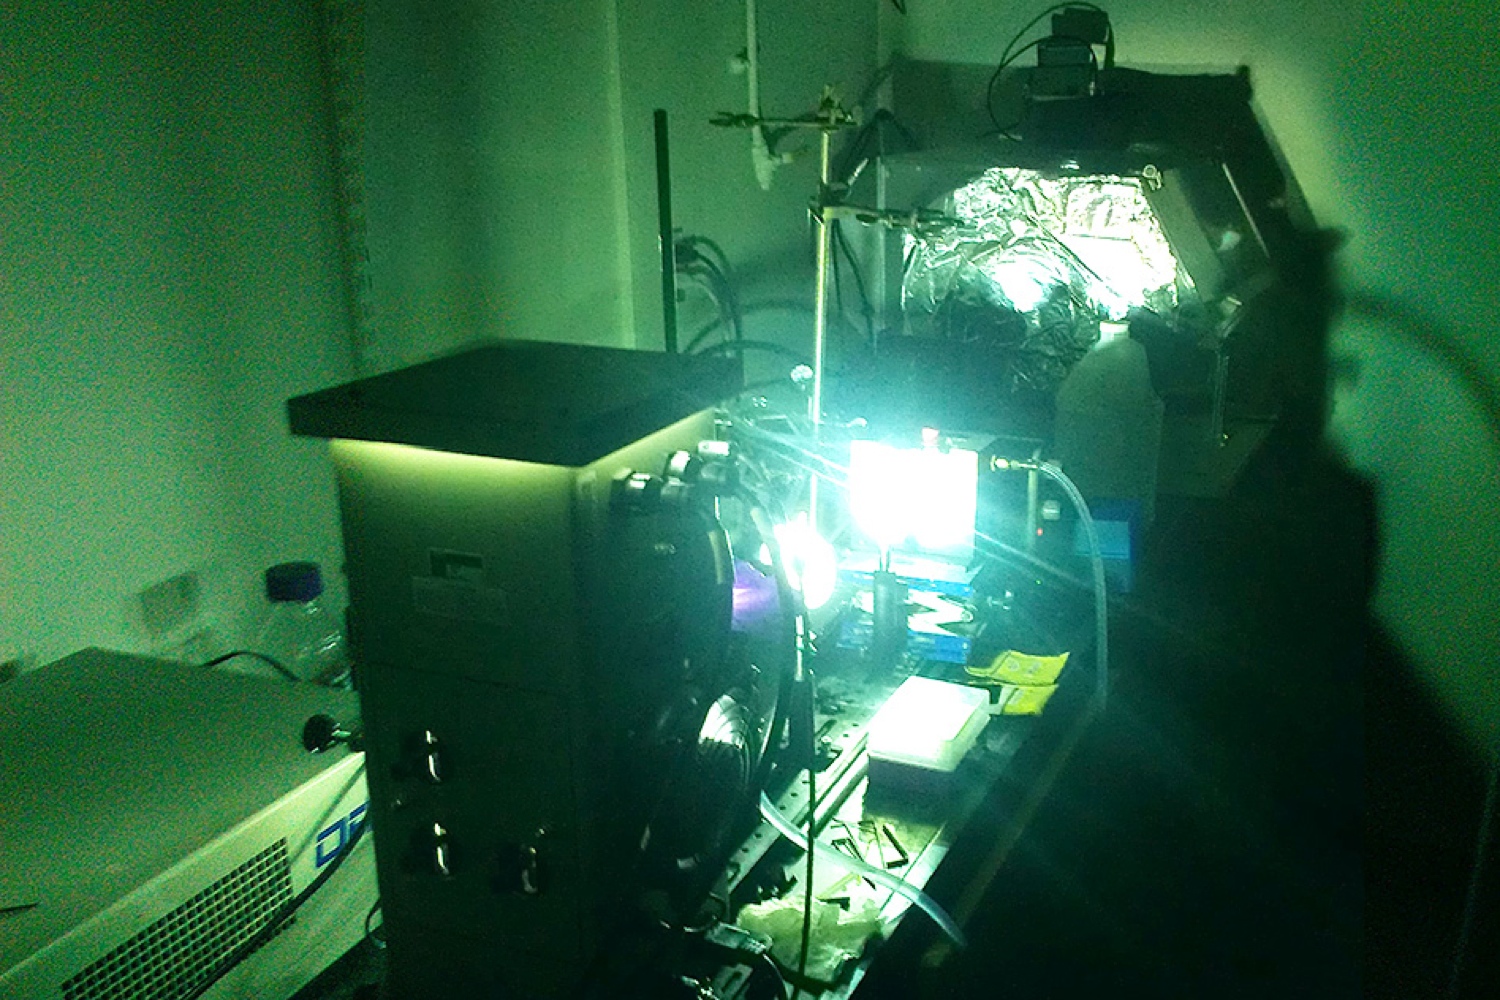 A powerful arc lamp is used to simulate sunlight on a sample of photoswitchable molecules, driving structural changes at the molecular level. A portion of the light's energy is stored with each structural change. The progress of these changes can be tracked by monitoring the molecules' optical properties. (MIT)